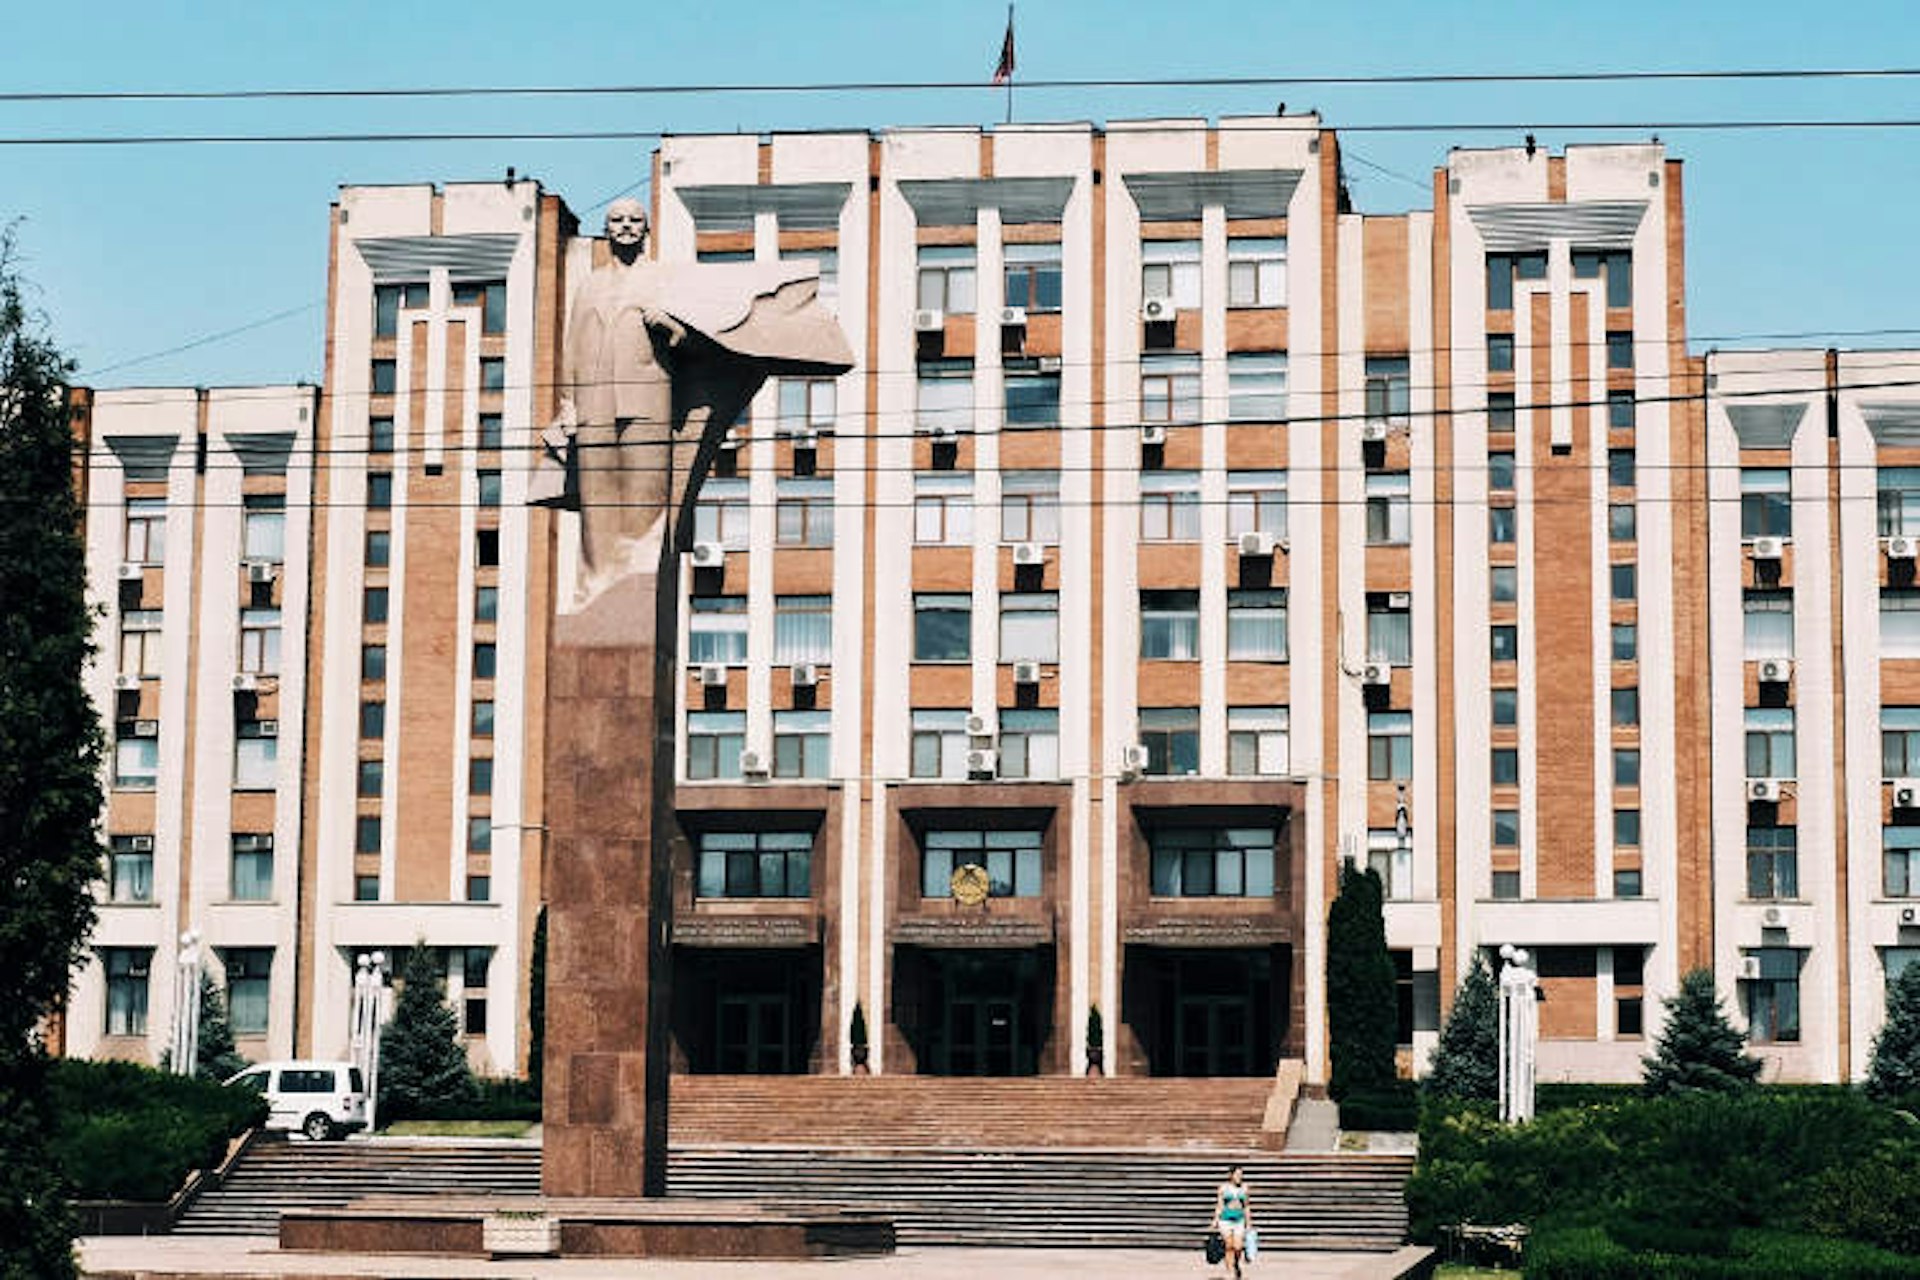 Presidential Palace fronted by Lenin's statue, Tiraspol. Image by Mark Baker / Lonely Planet